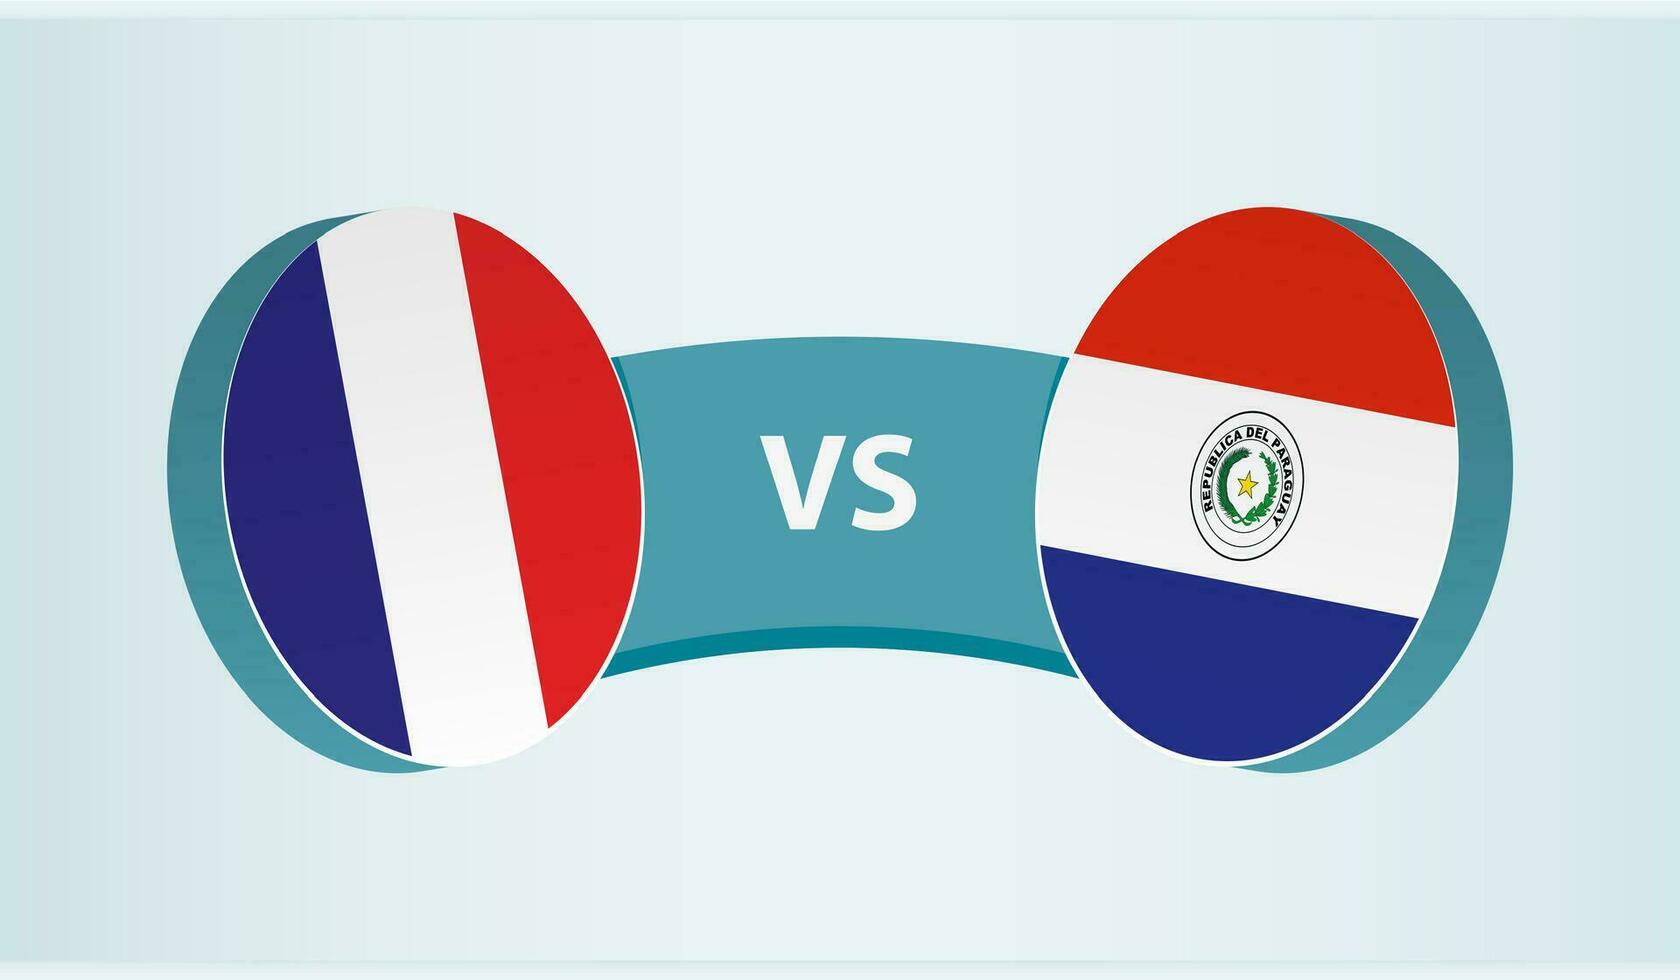 France versus Paraguay, team sports competition concept. vector